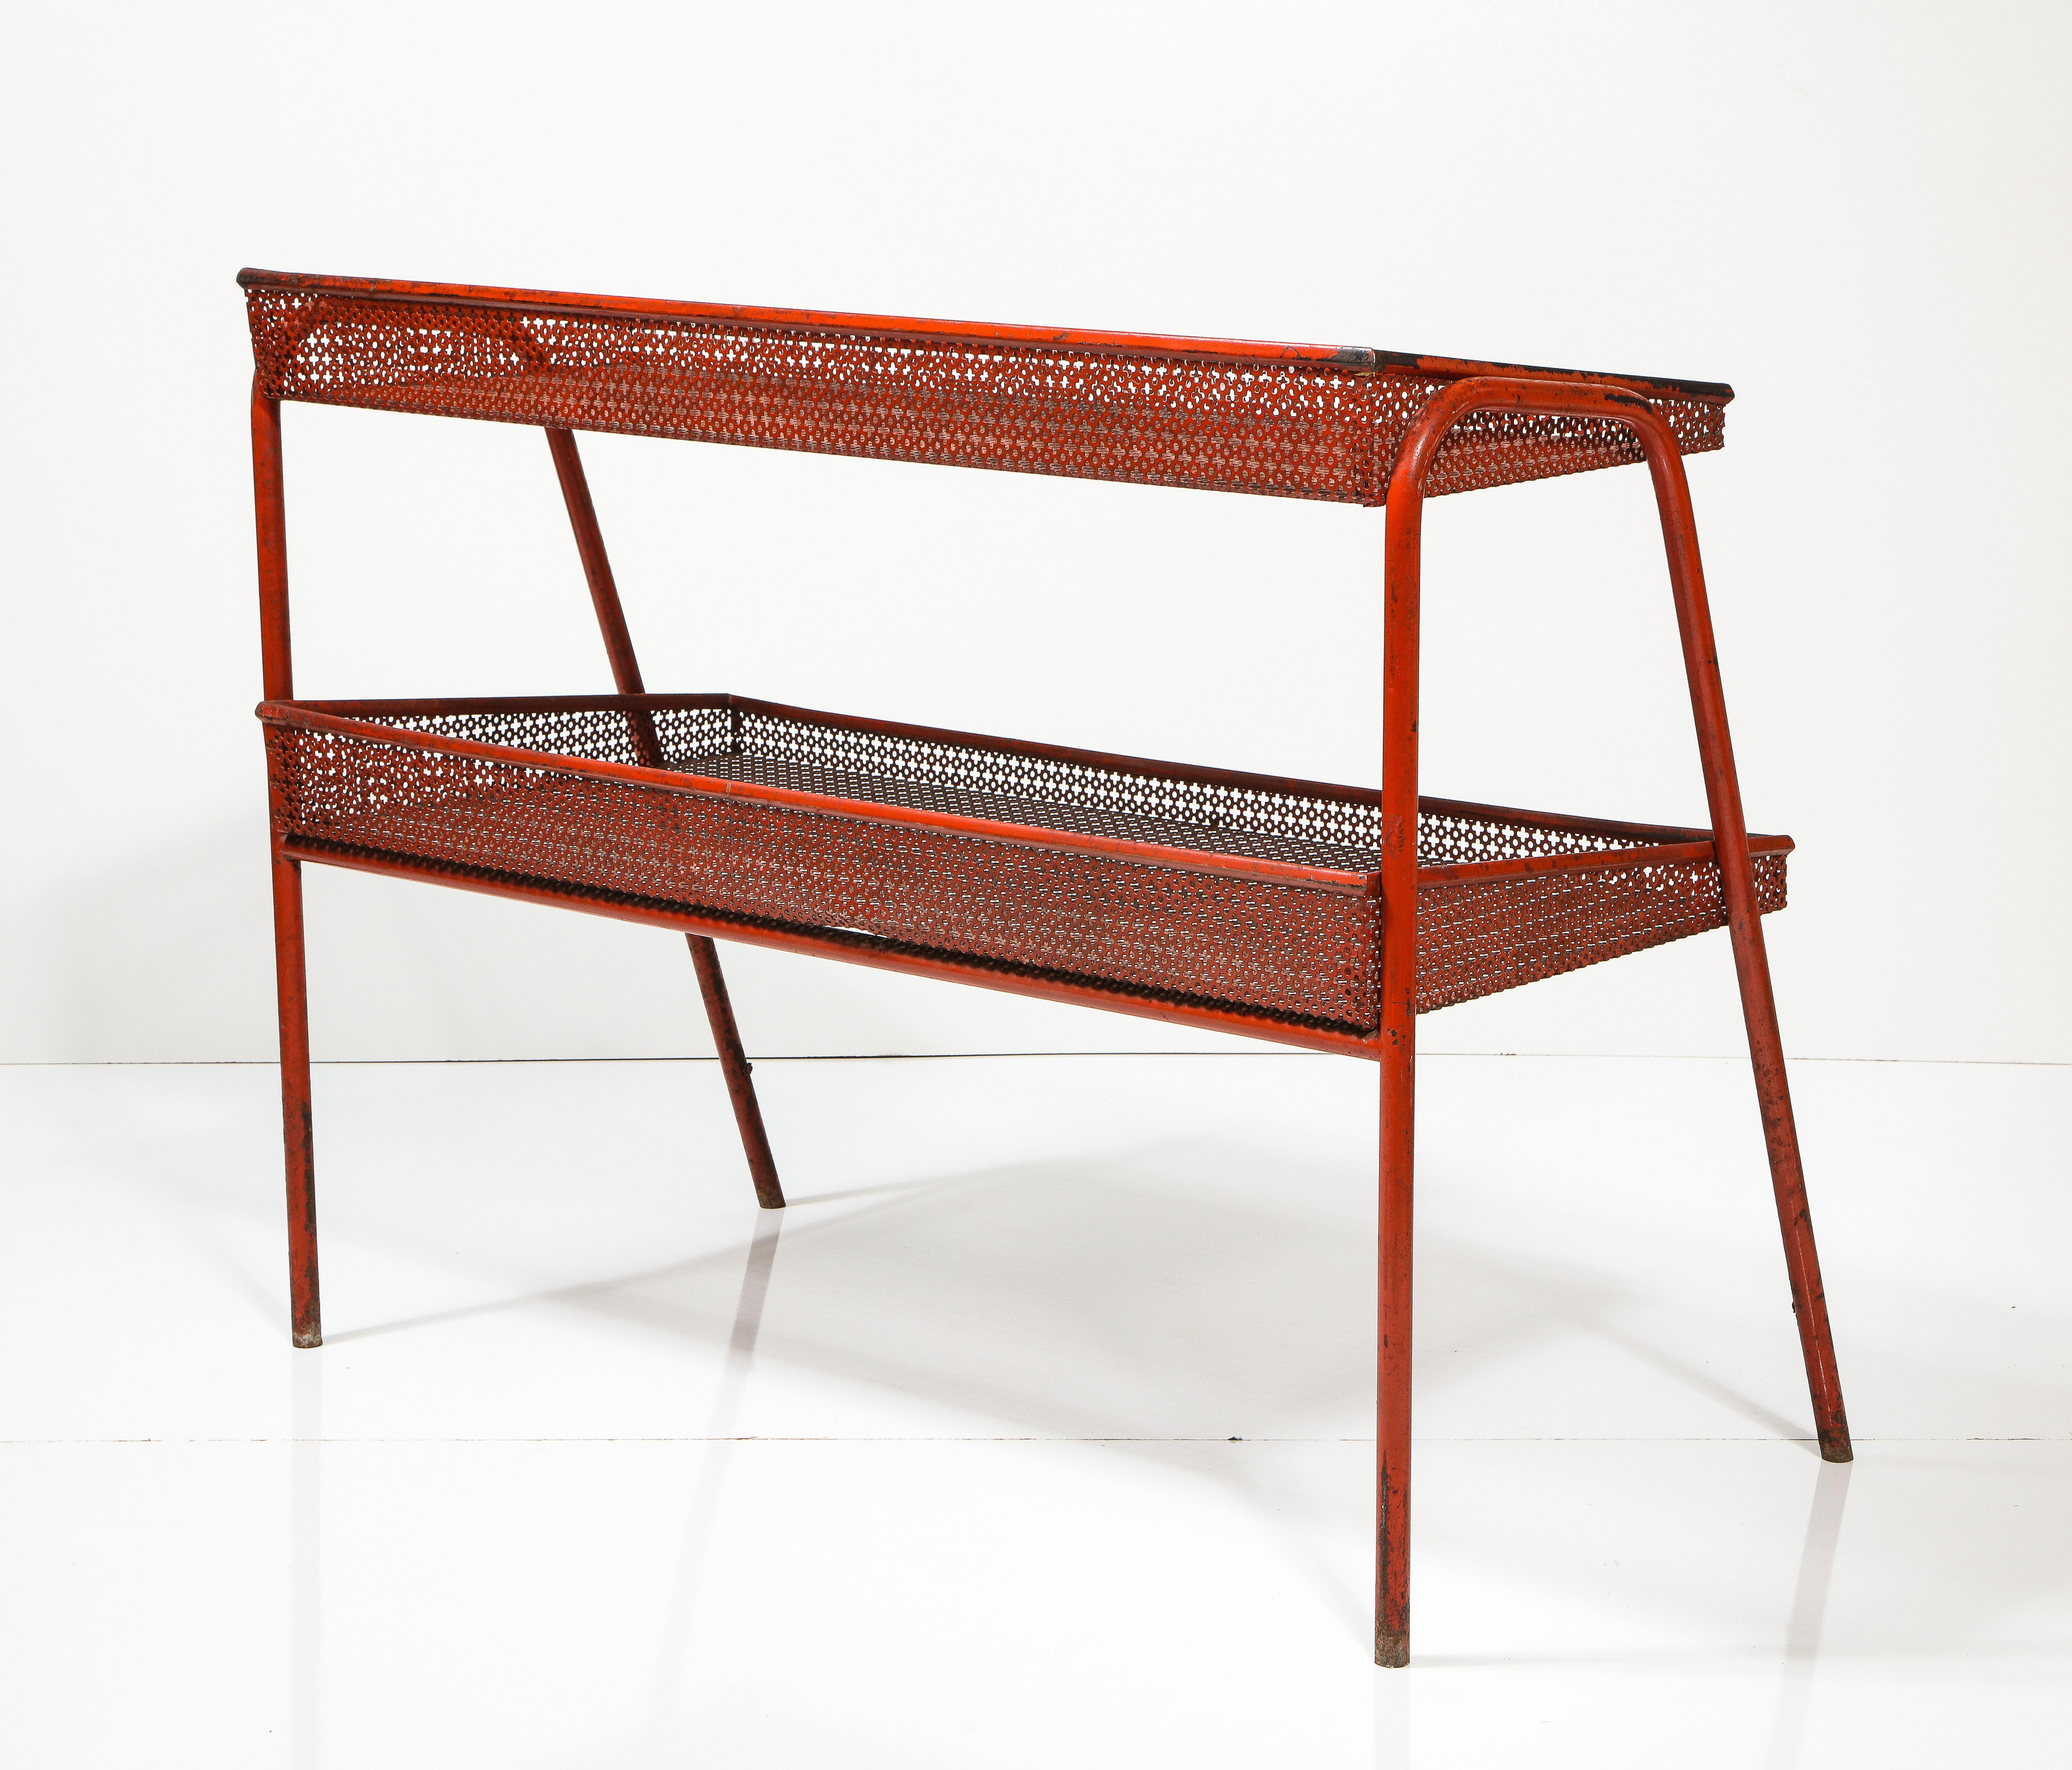 Mid-20th Century Red Metal Shelf attributed to Mathieu Mategot, France, c. 1940 For Sale